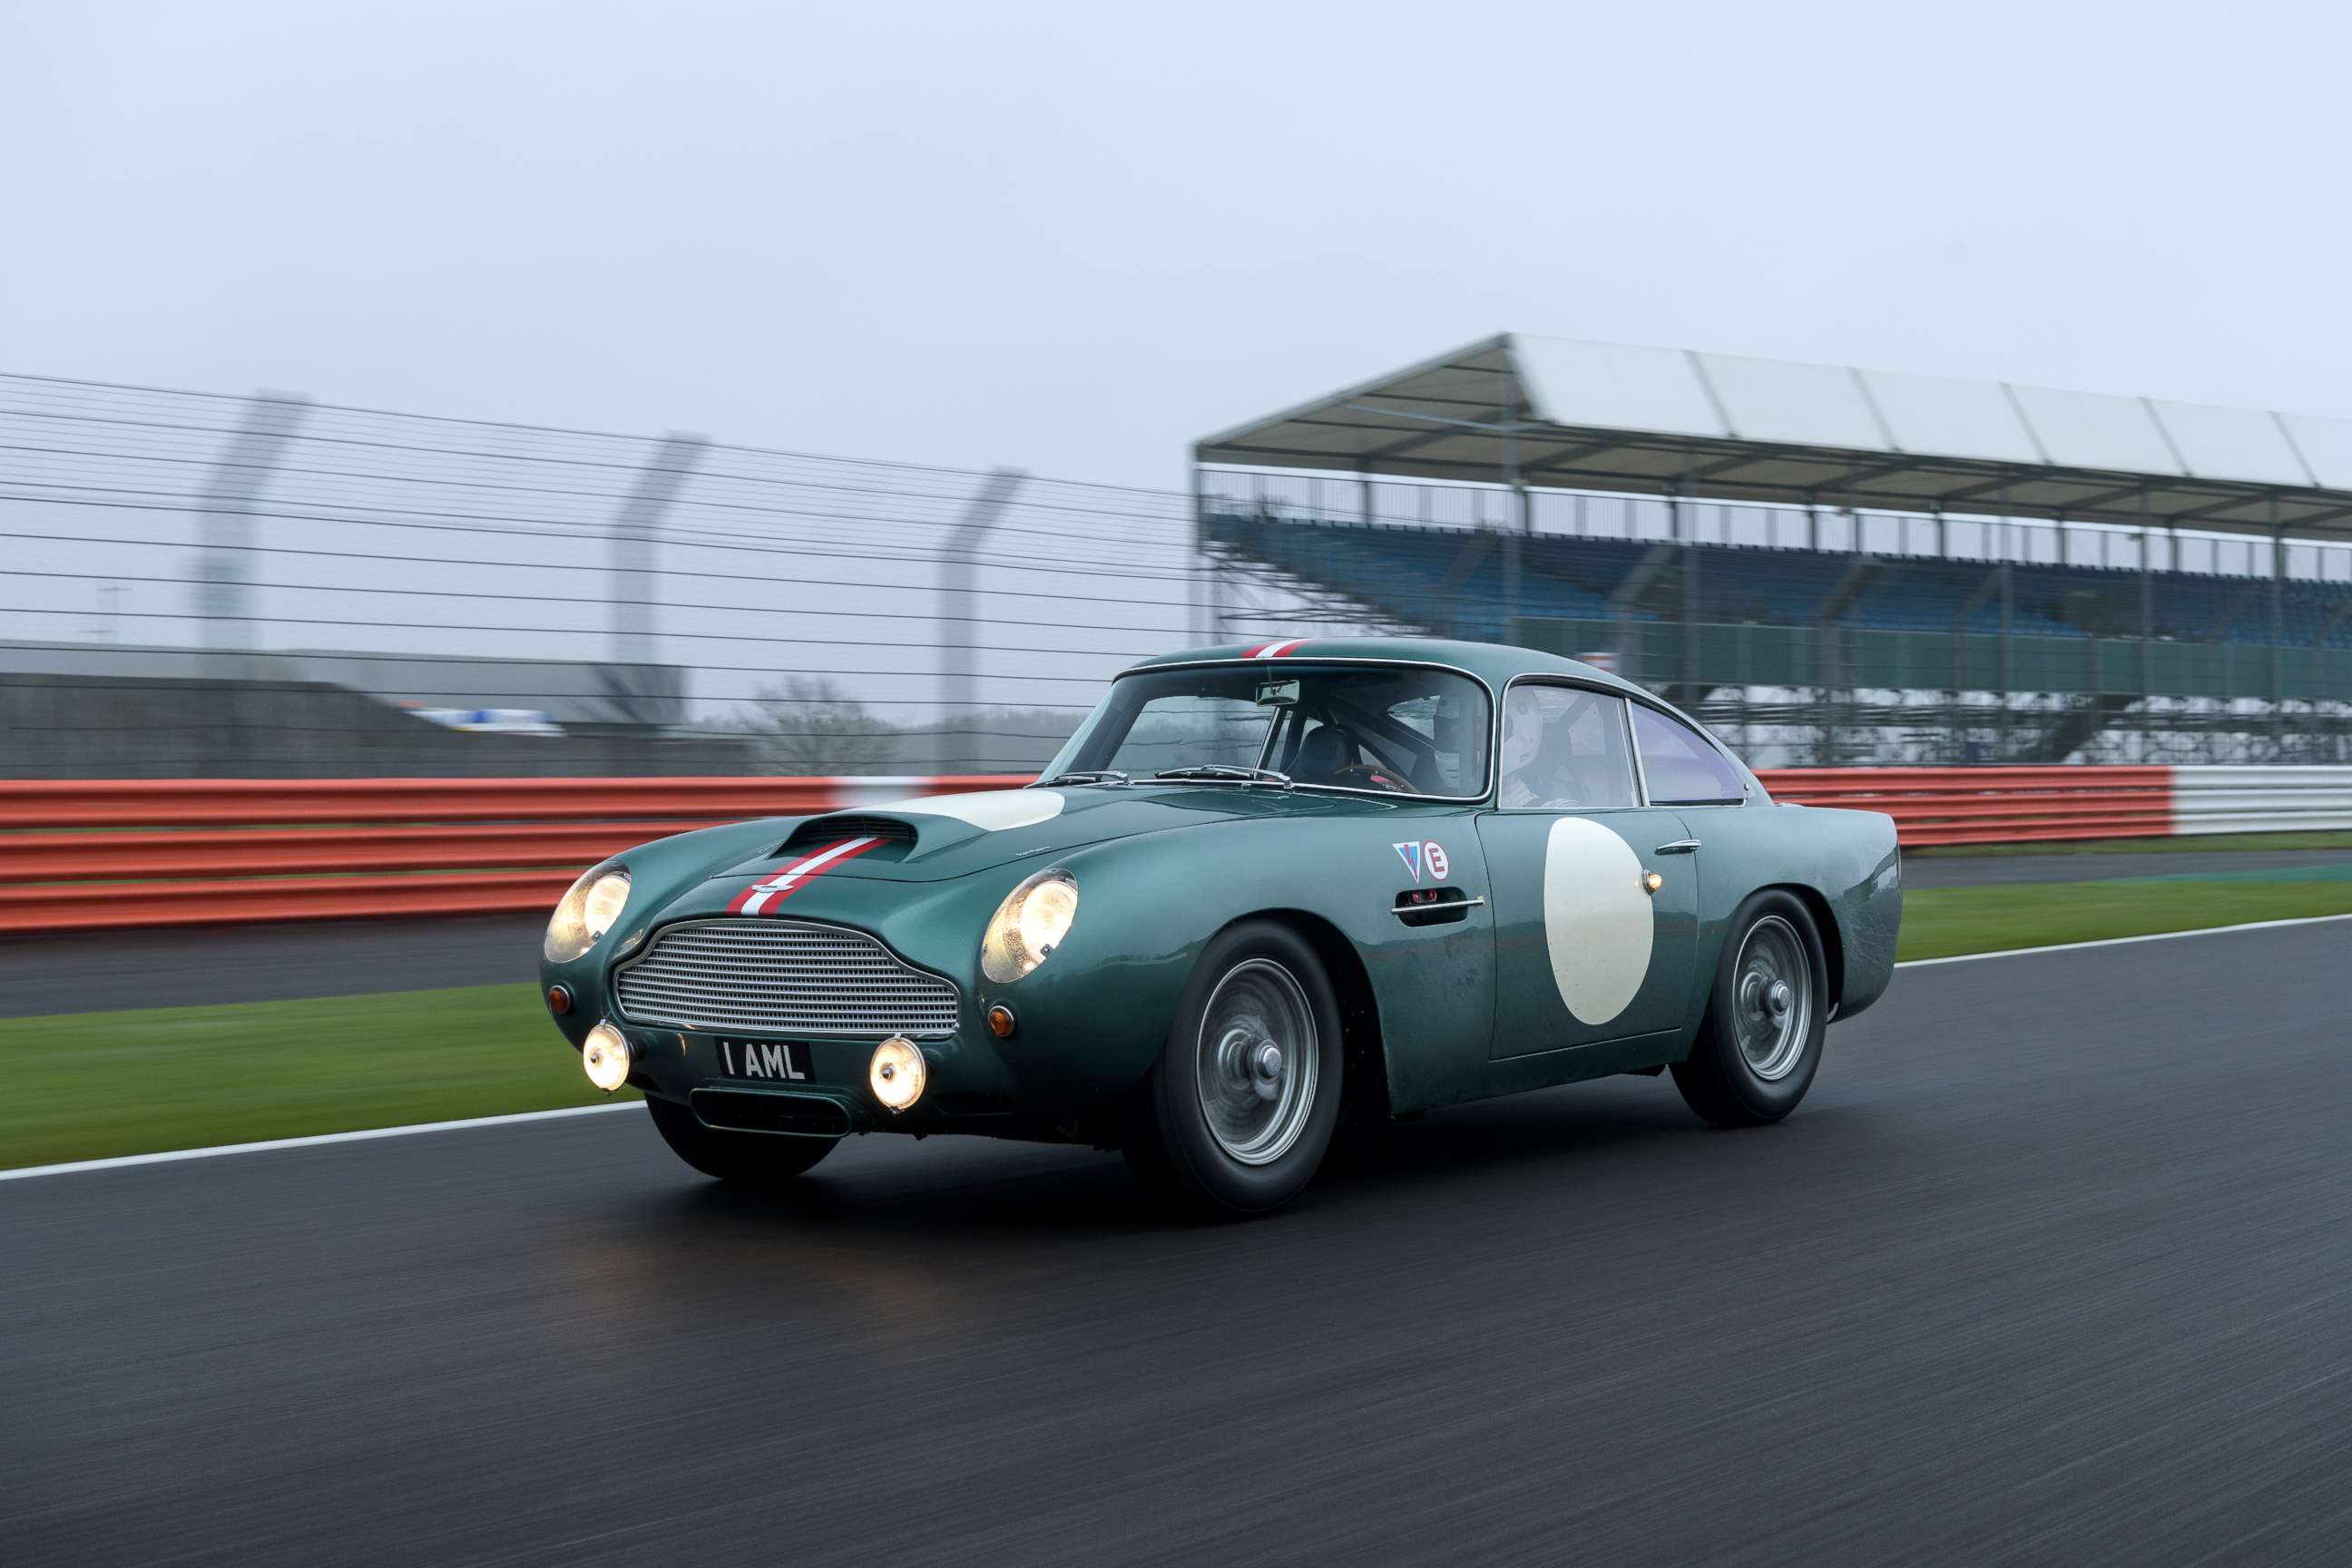 PHOTO: Aston Martin is producing 25 exact replicas of the original DB4 GT. Each costs $2.5 million.